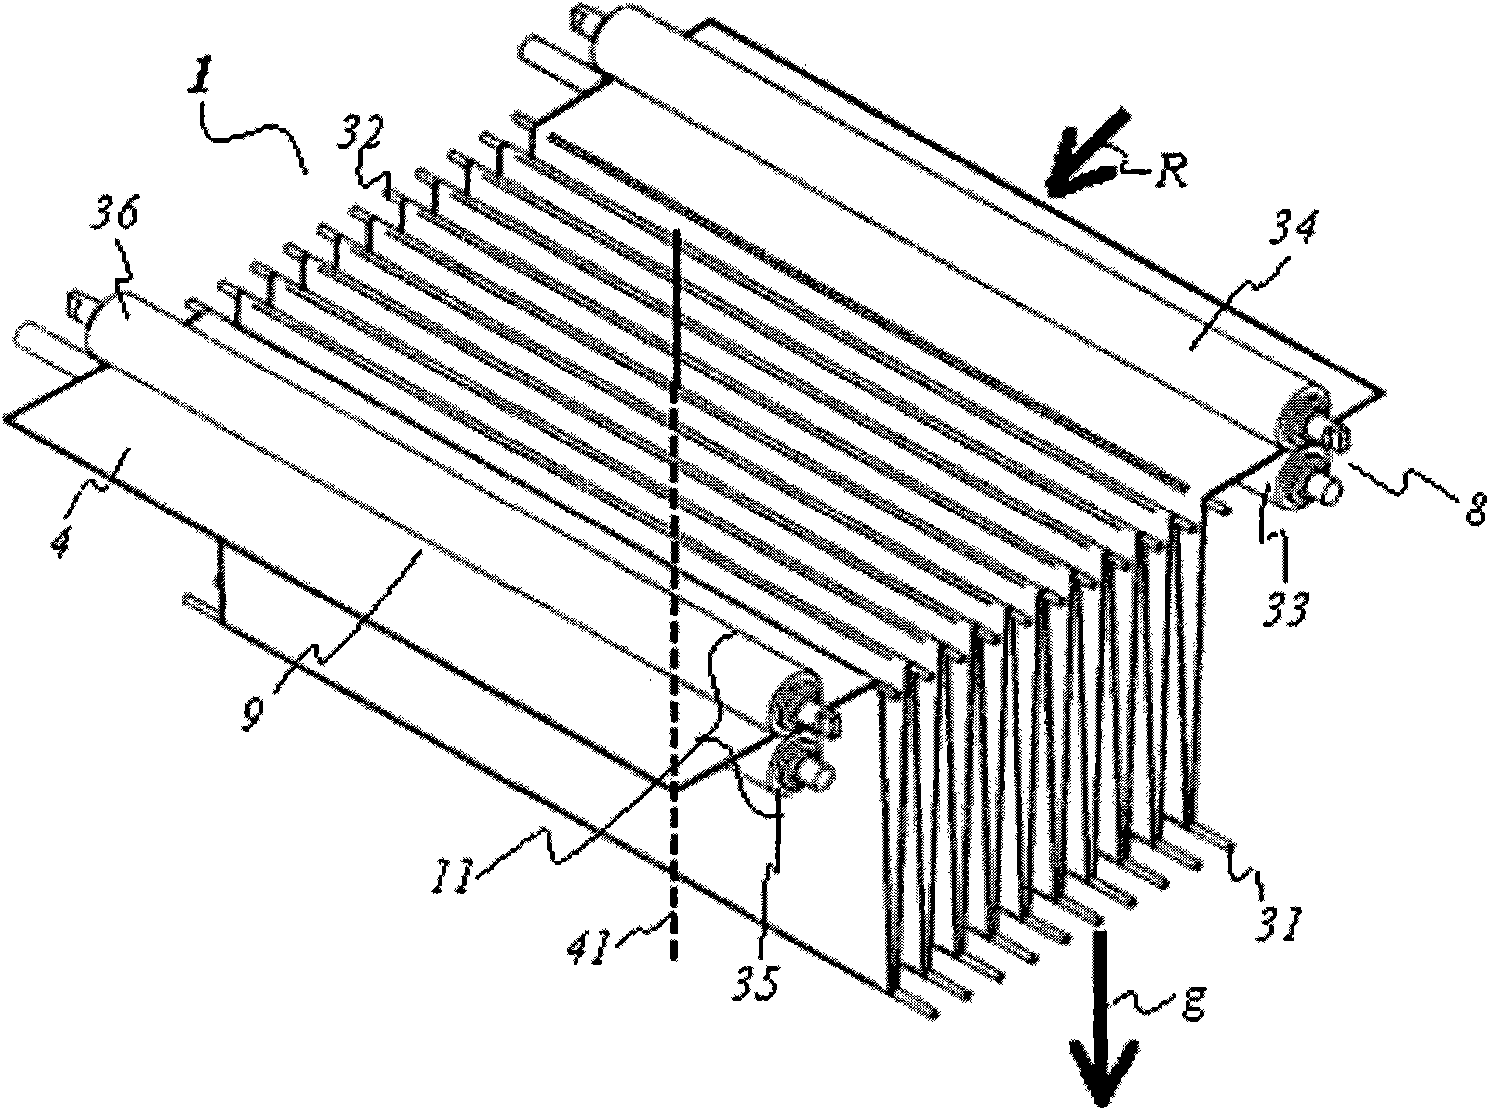 Film storage device, device and method for producing containers